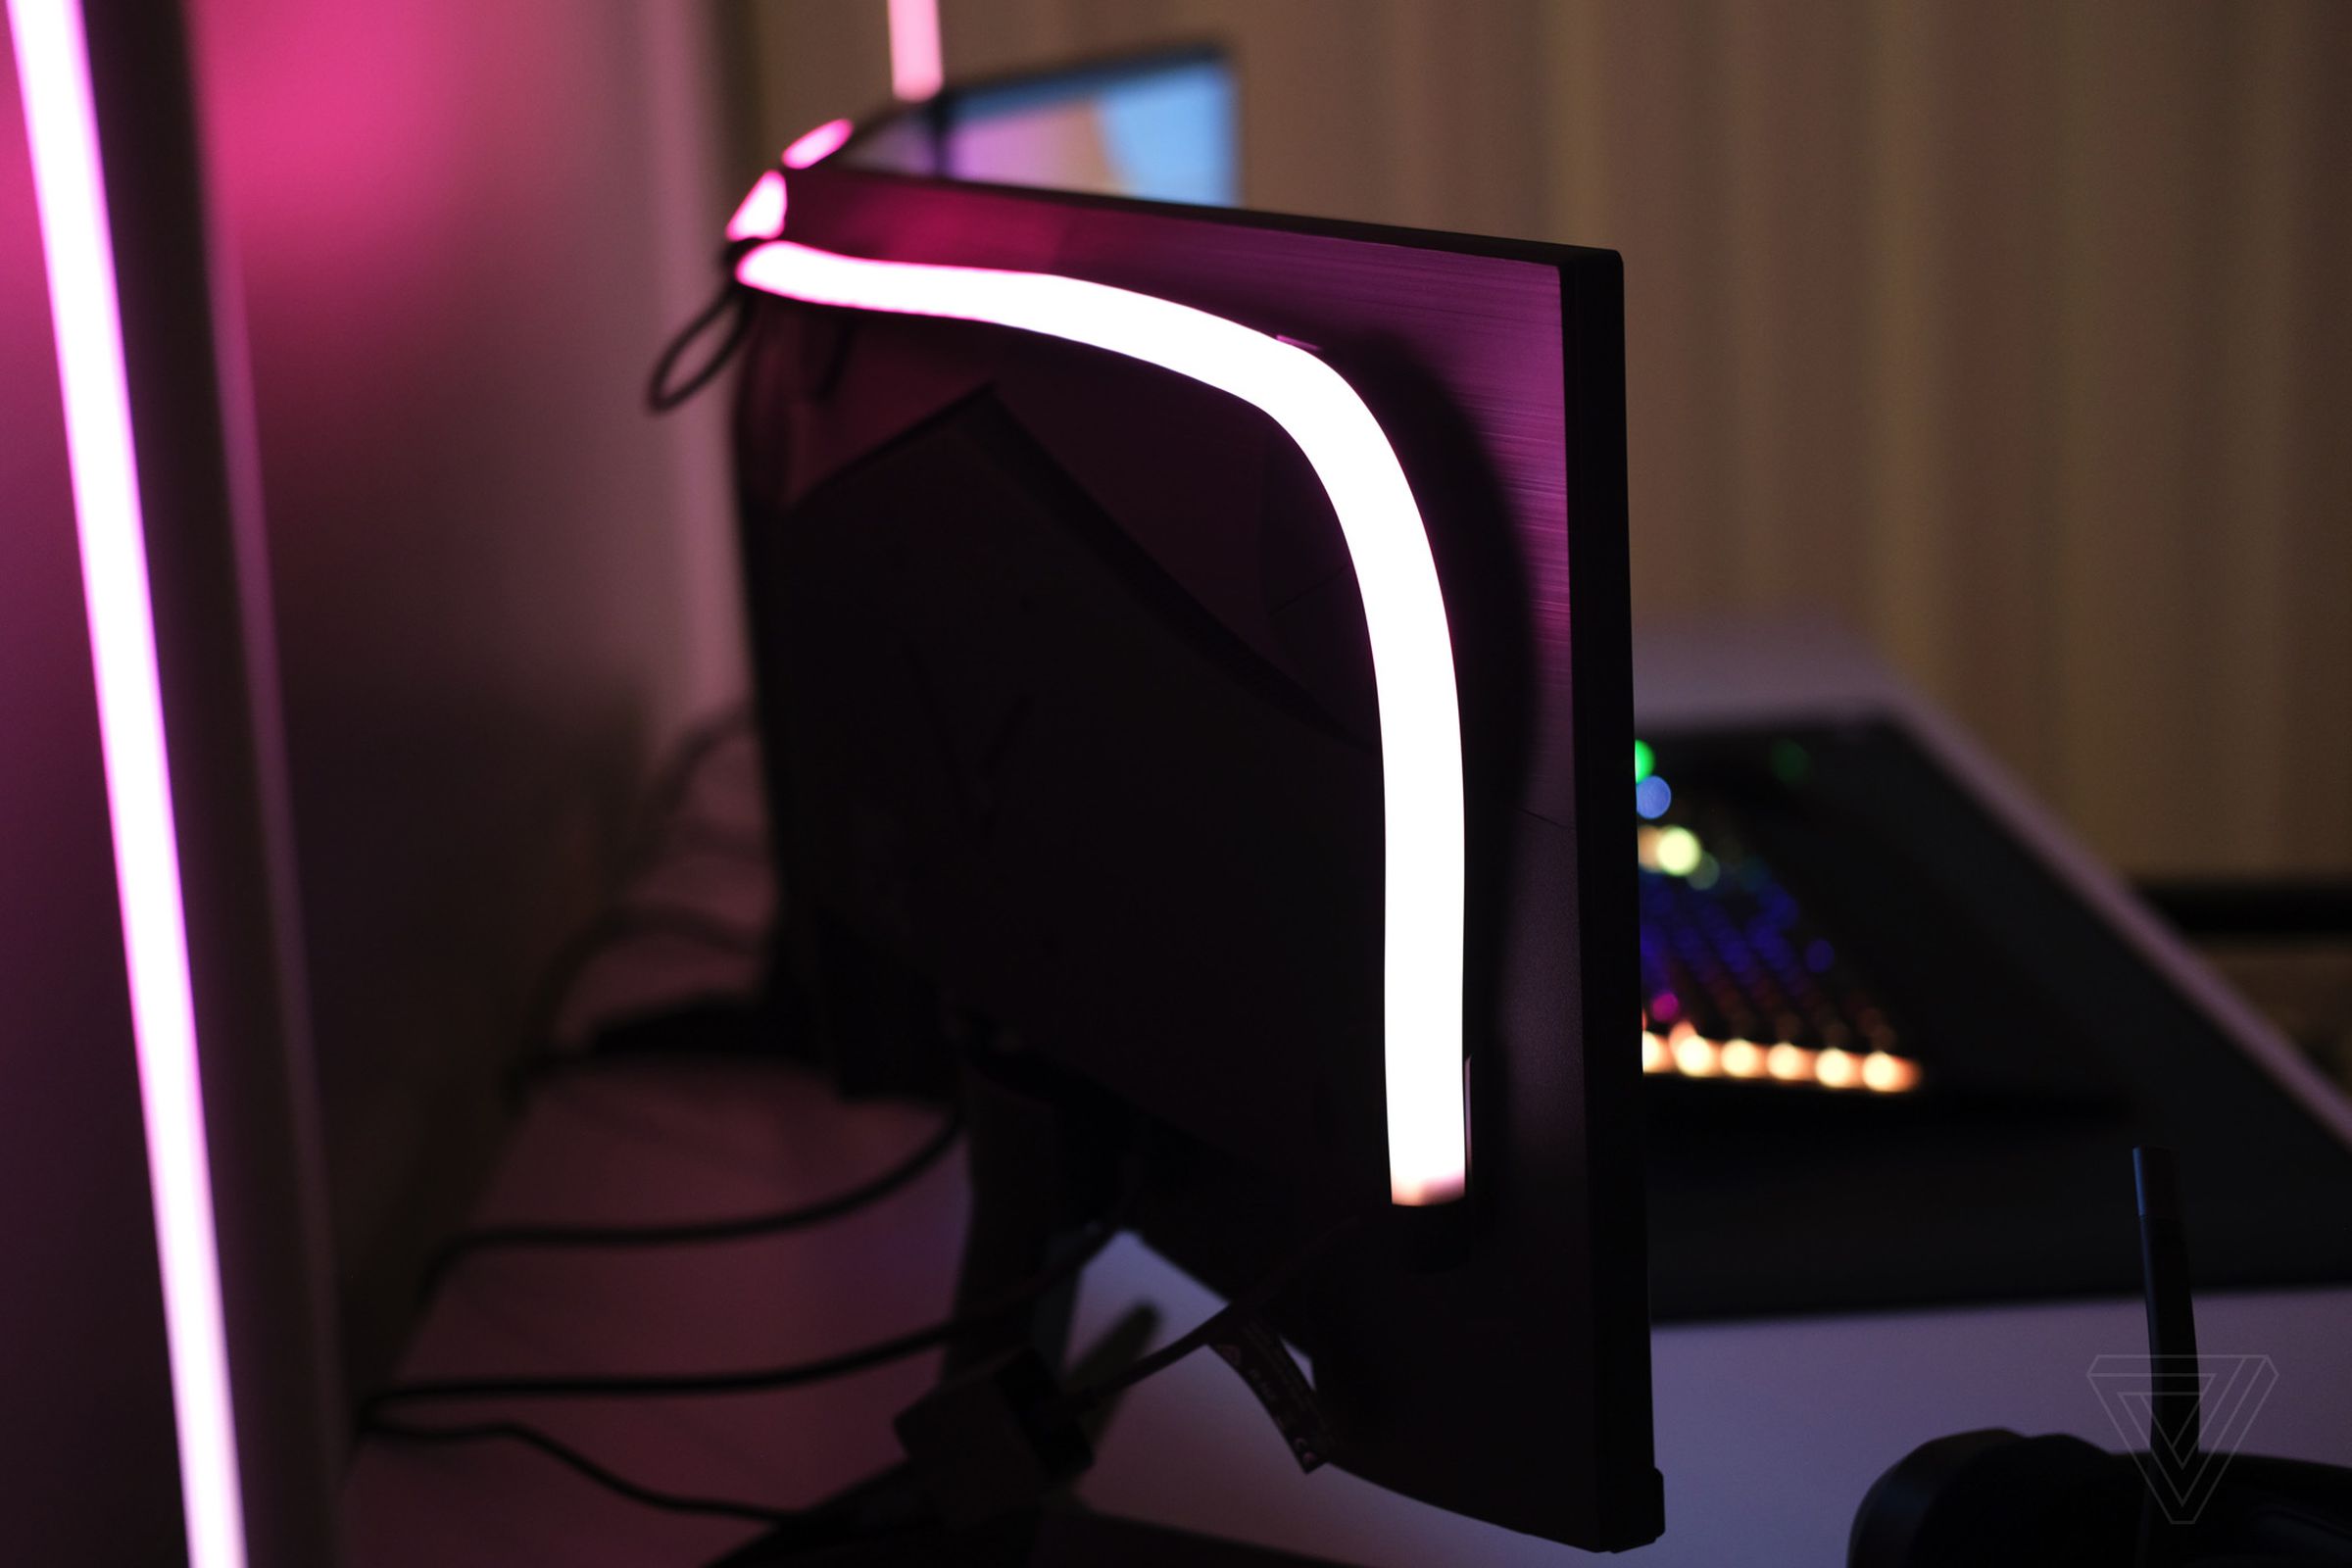 The flexible lightstrips can connect with Corsair’s iCue software and Philips Sync app.